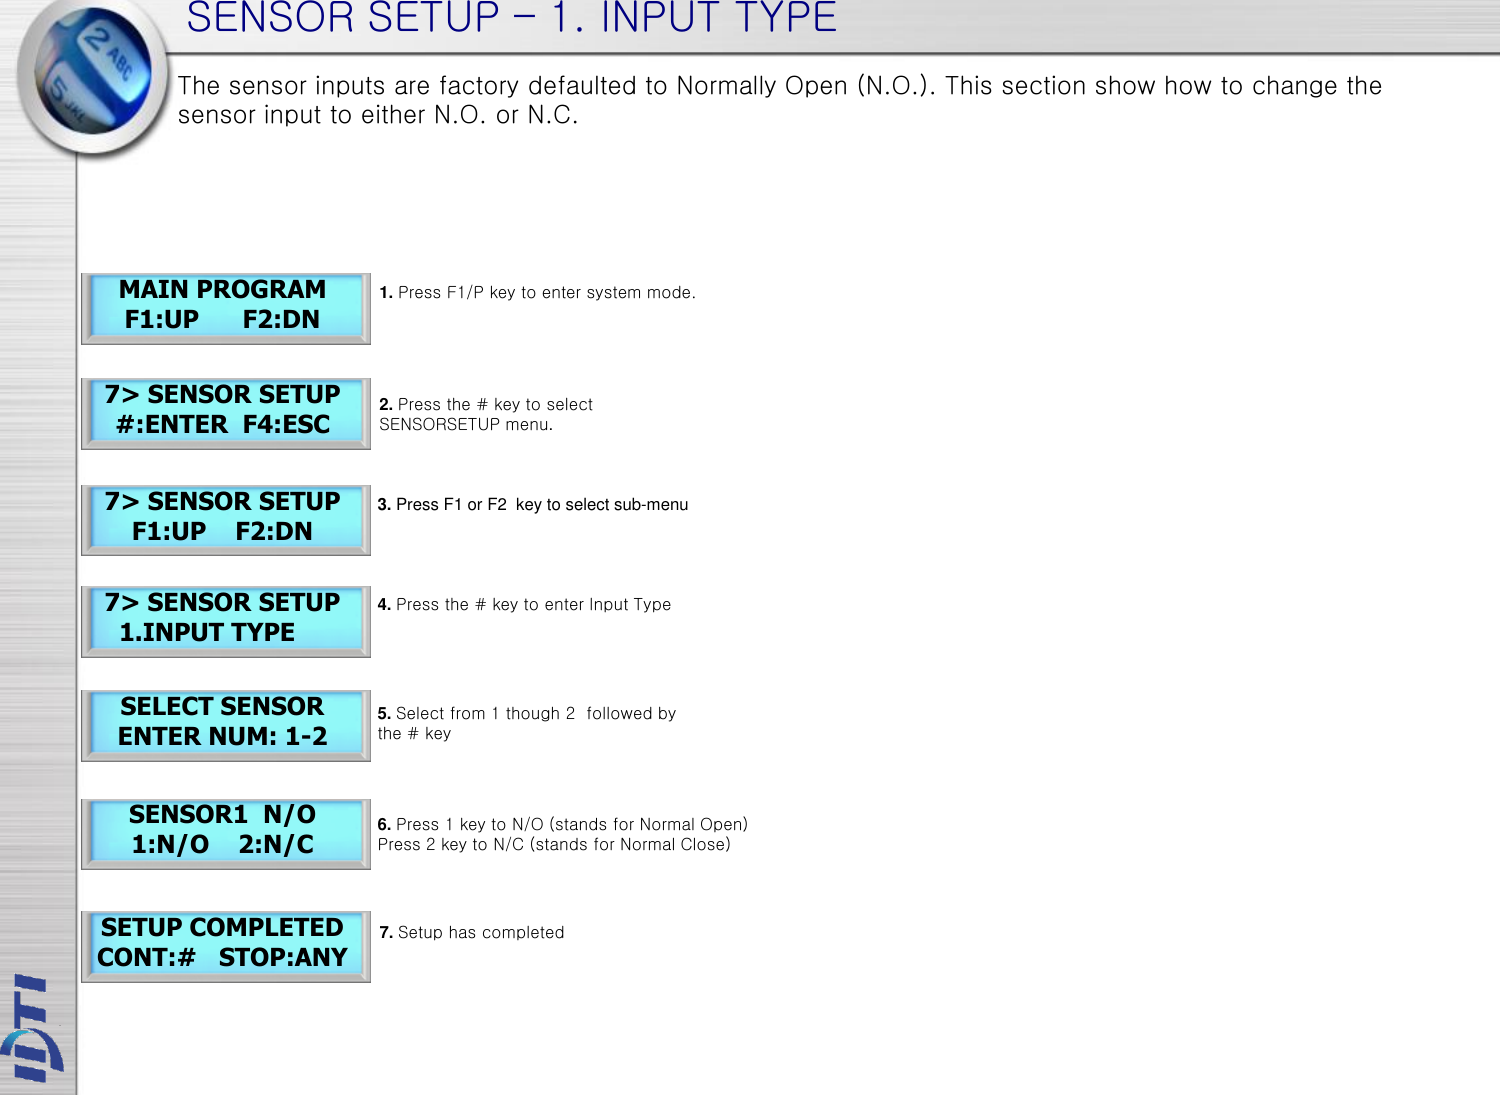 SENSOR SETUP – 1. INPUT TYPE 7&gt; SENSOR SETUP     1.INPUT TYPE SELECT SENSOR ENTER NUM: 1-2 MAIN PROGRAM F1:UP      F2:DN 7&gt; SENSOR SETUP #:ENTER  F4:ESC 7&gt; SENSOR SETUP F1:UP    F2:DN SENSOR1  N/O 1:N/O    2:N/C SETUP COMPLETED CONT:#   STOP:ANY The sensor inputs are factory defaulted to Normally Open (N.O.). This section show how to change the sensor input to either N.O. or N.C. 1. Press F1/P key to enter system mode. 2. Press the # key to select  SENSORSETUP menu. 4. Press the # key to enter Input Type 5. Select from 1 though 2  followed by the # key 3. Press F1 or F2  key to select sub-menu 7. Setup has completed 6. Press 1 key to N/O (stands for Normal Open) Press 2 key to N/C (stands for Normal Close) 